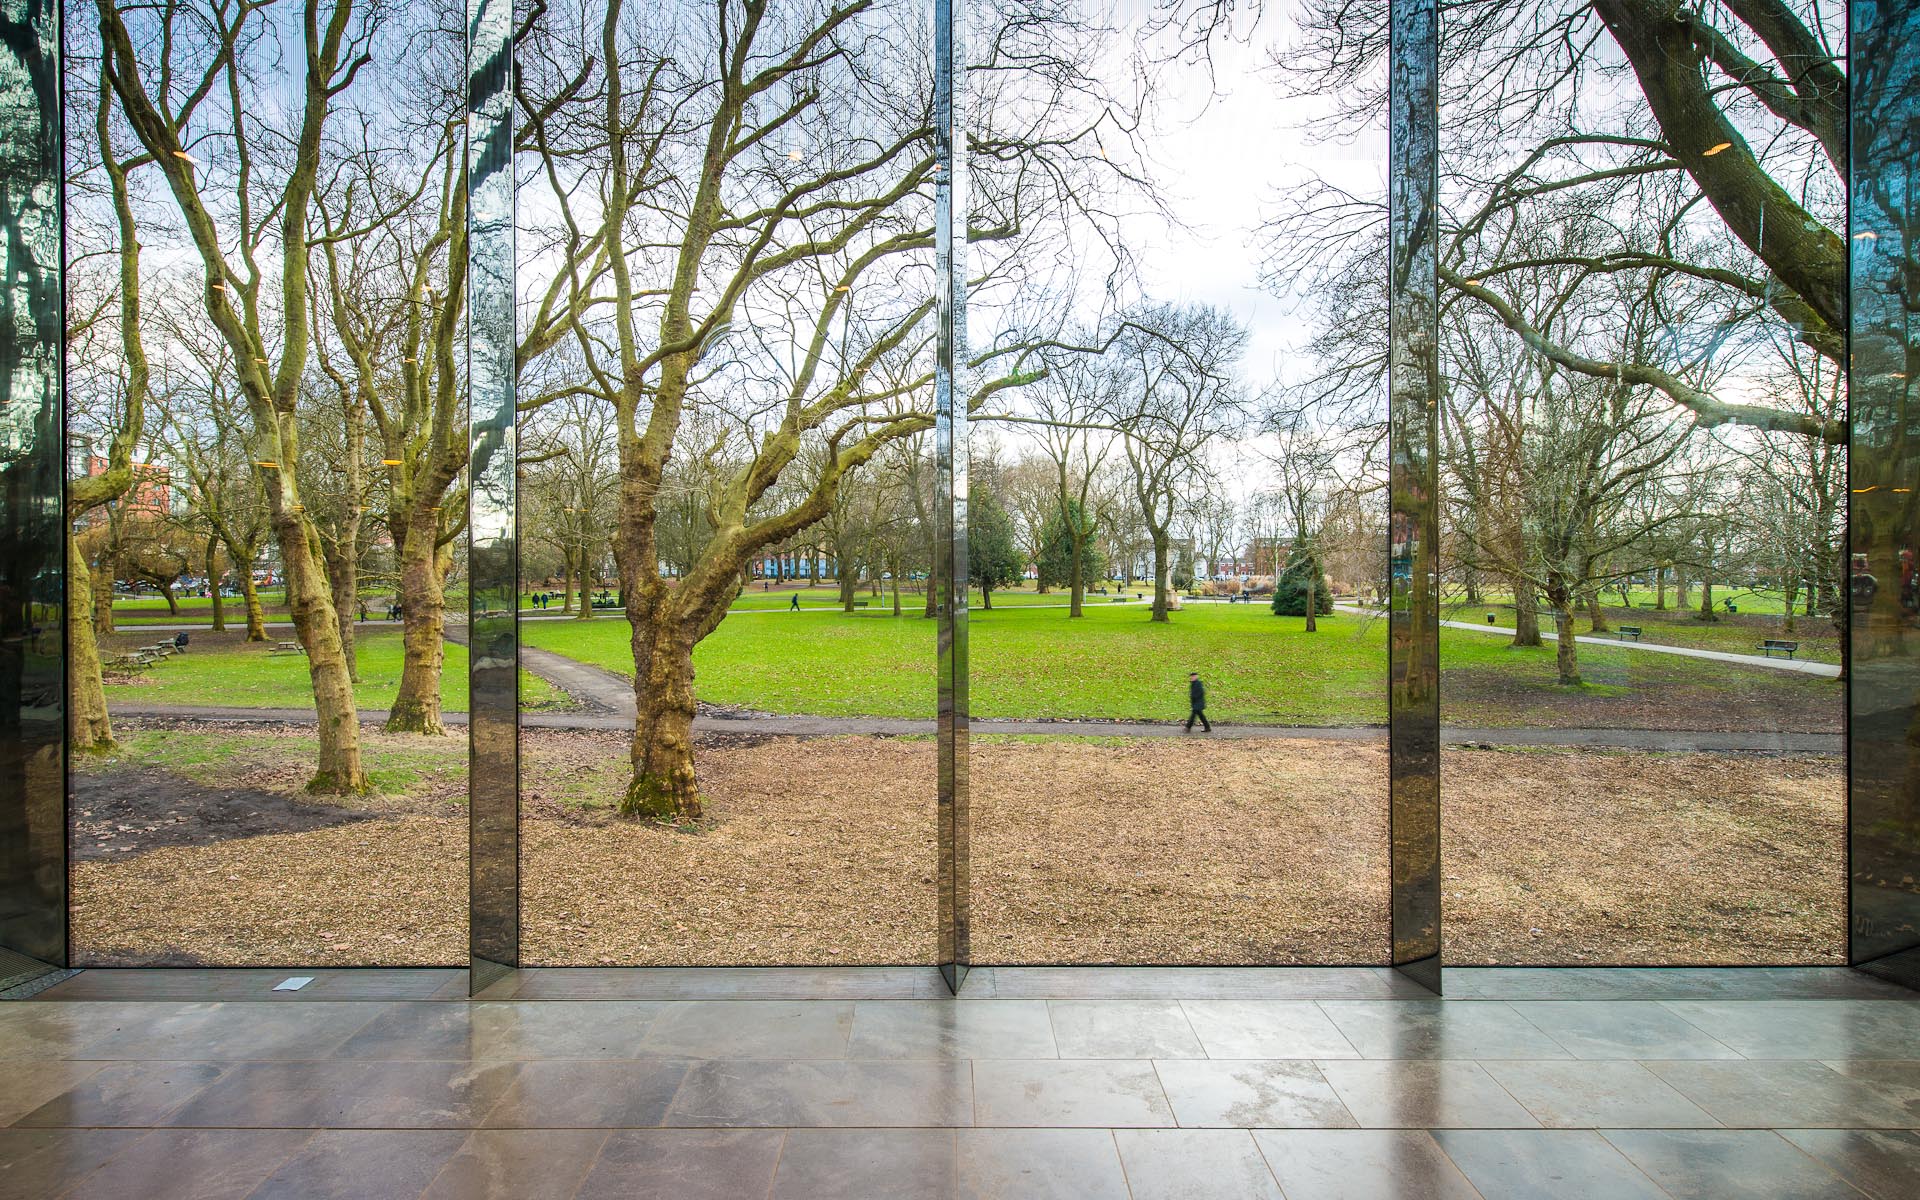 Interior daytime capture of Whitworth Art Gallery Manchester England glass panels view through to green park